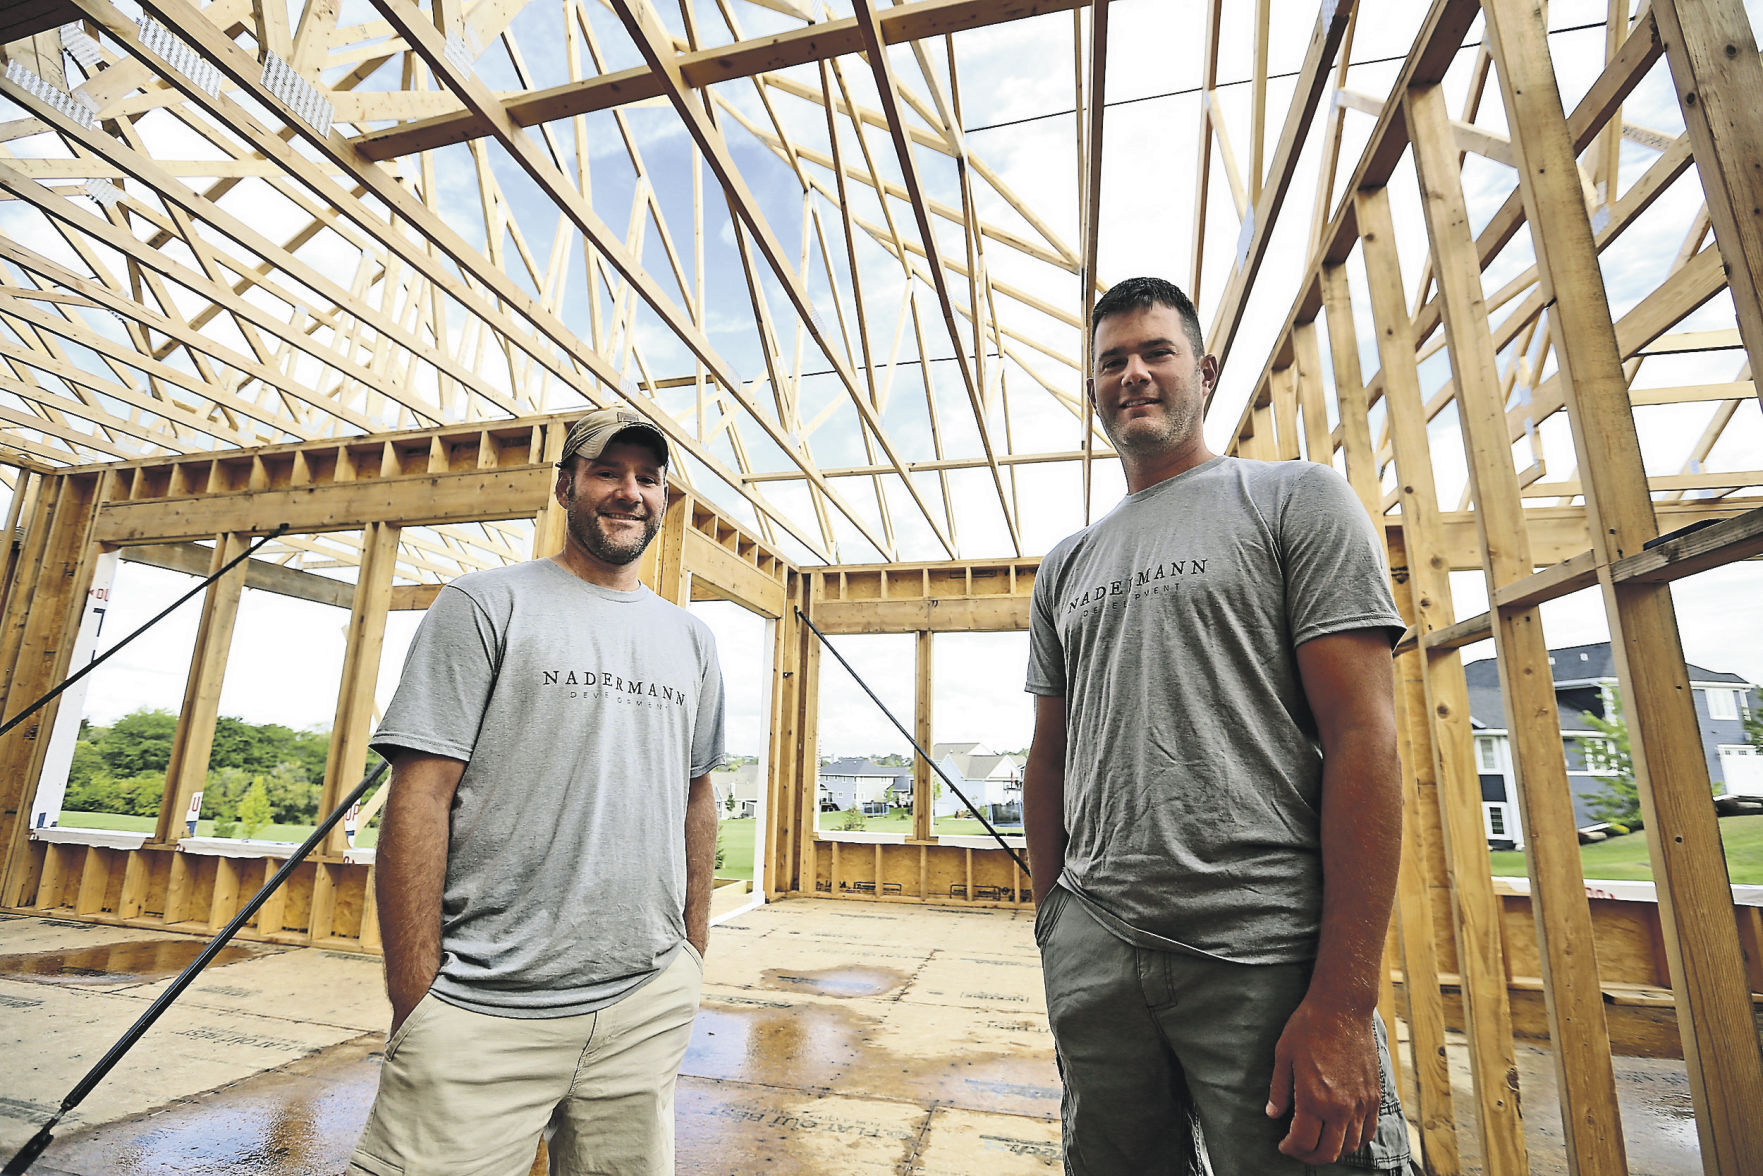 Terry Nadermann (left) and Tony Nadermann, of Nadermann Development, started building spec homes in 2004 while working other jobs. The business grew, and by 2006, they created their business. They build about 10 houses every year.    PHOTO CREDIT: JESSICA REILLY